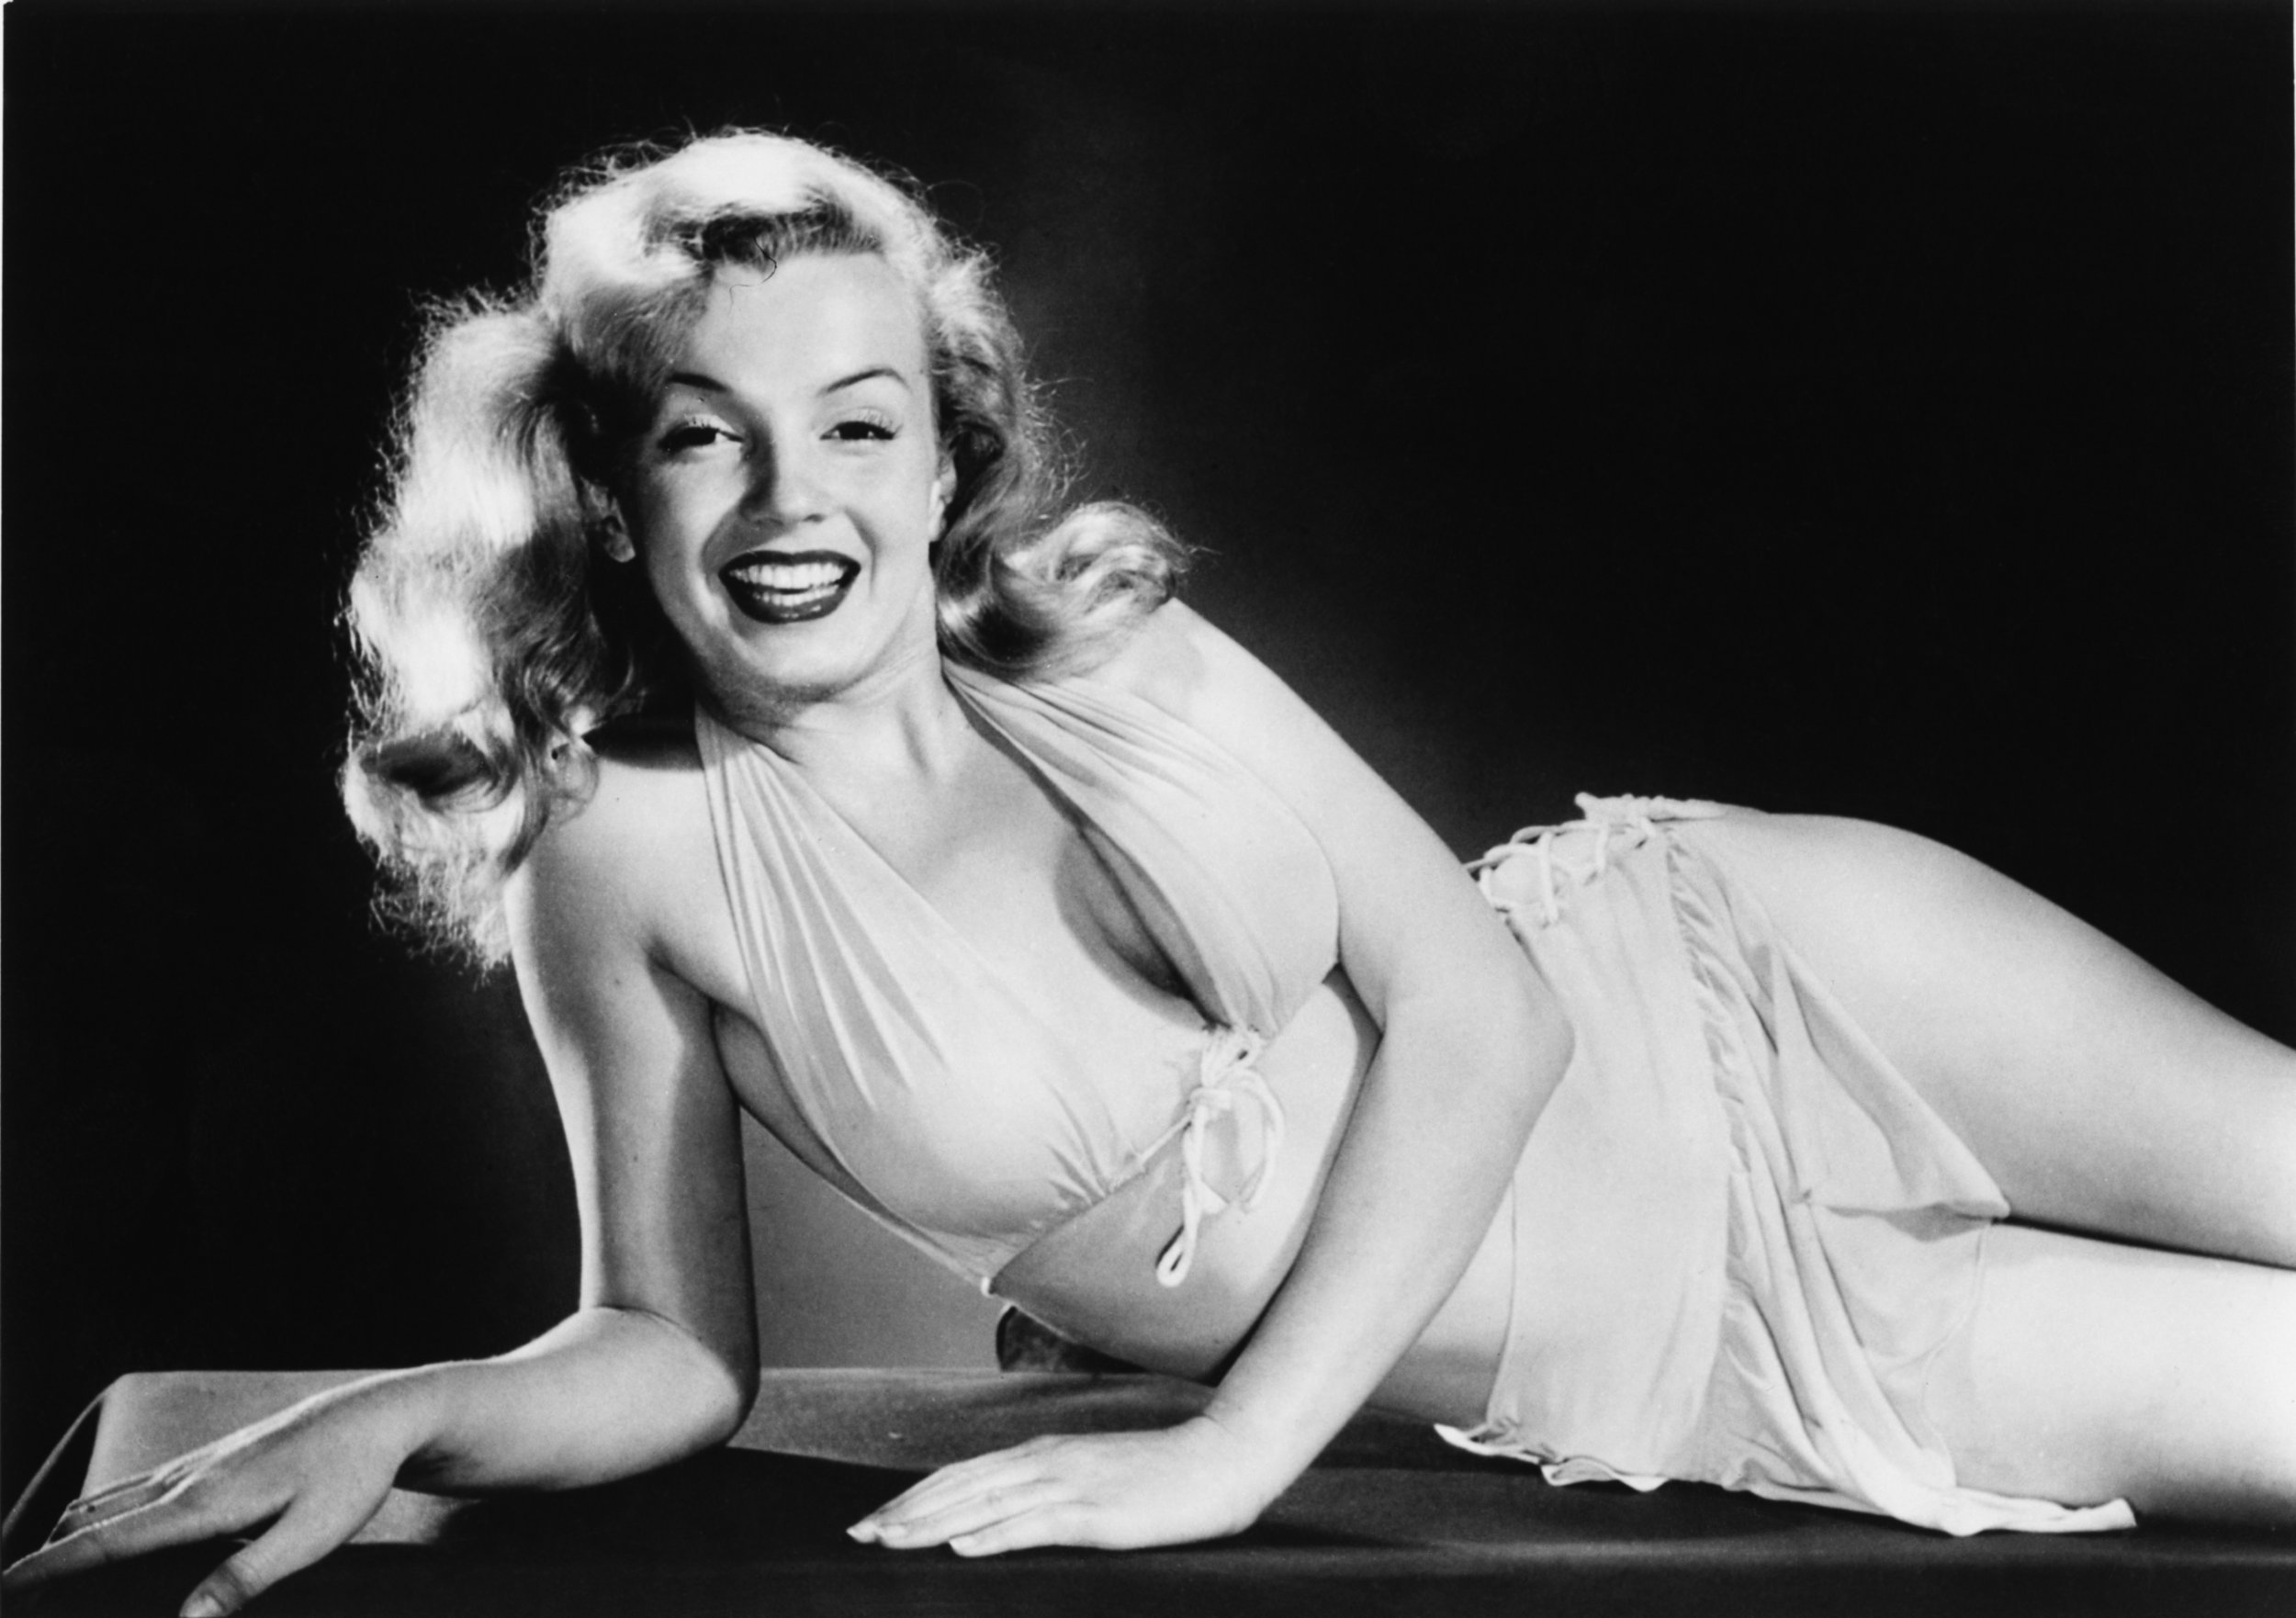 ayub mohamad recommends Did Marilyn Monroe Ever Pose Nude